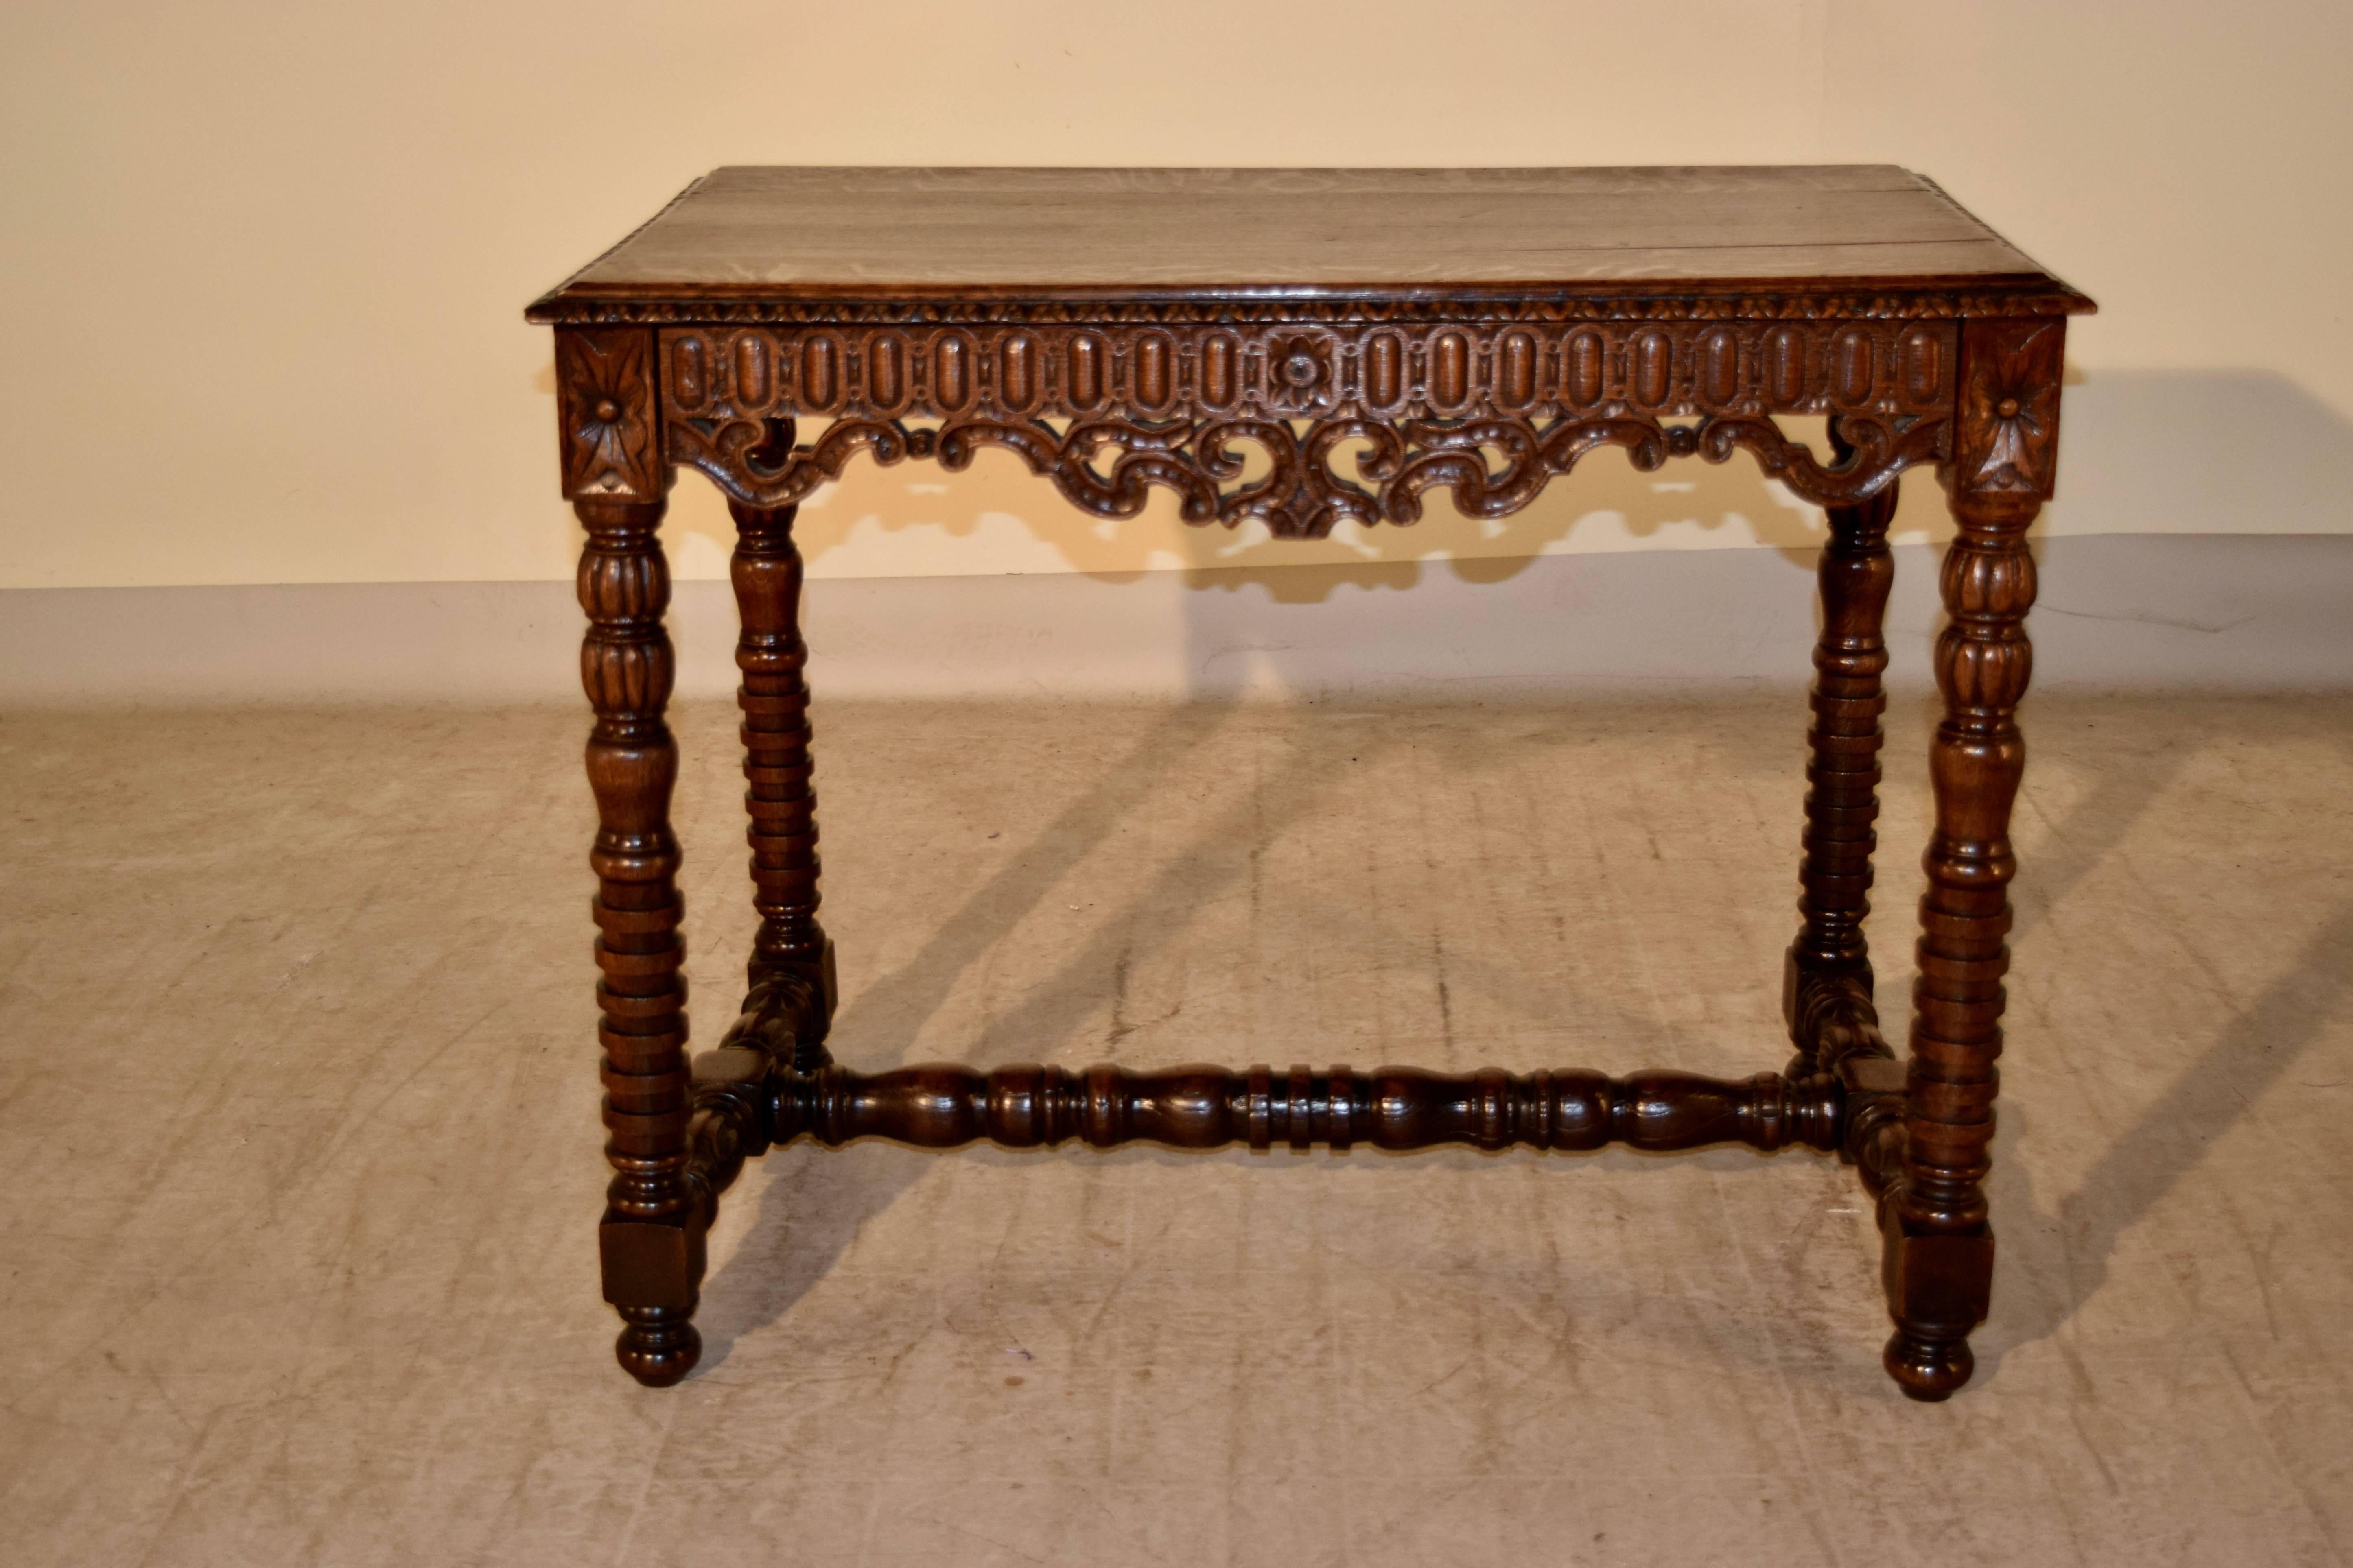 Baroque Revival 19th Century French Side Table